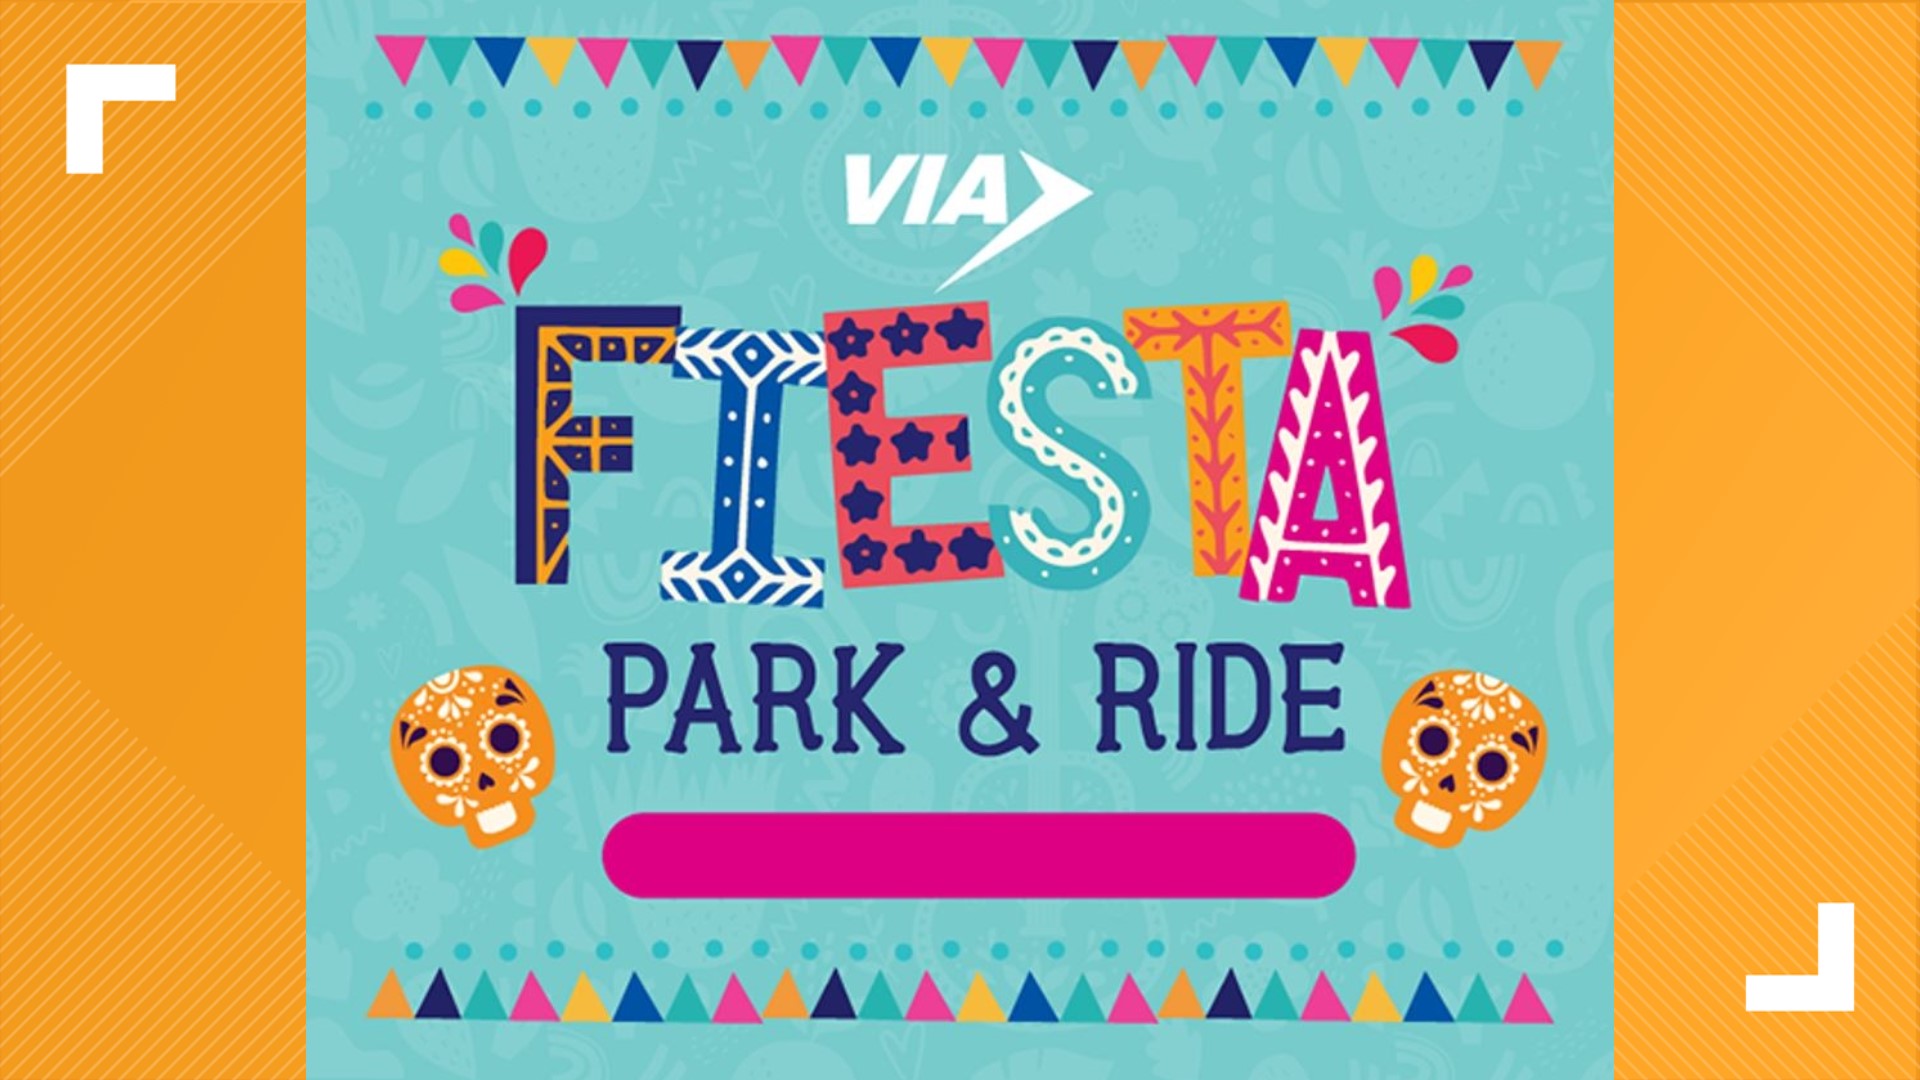 VIA takes the hassle out of parking for Fiesta